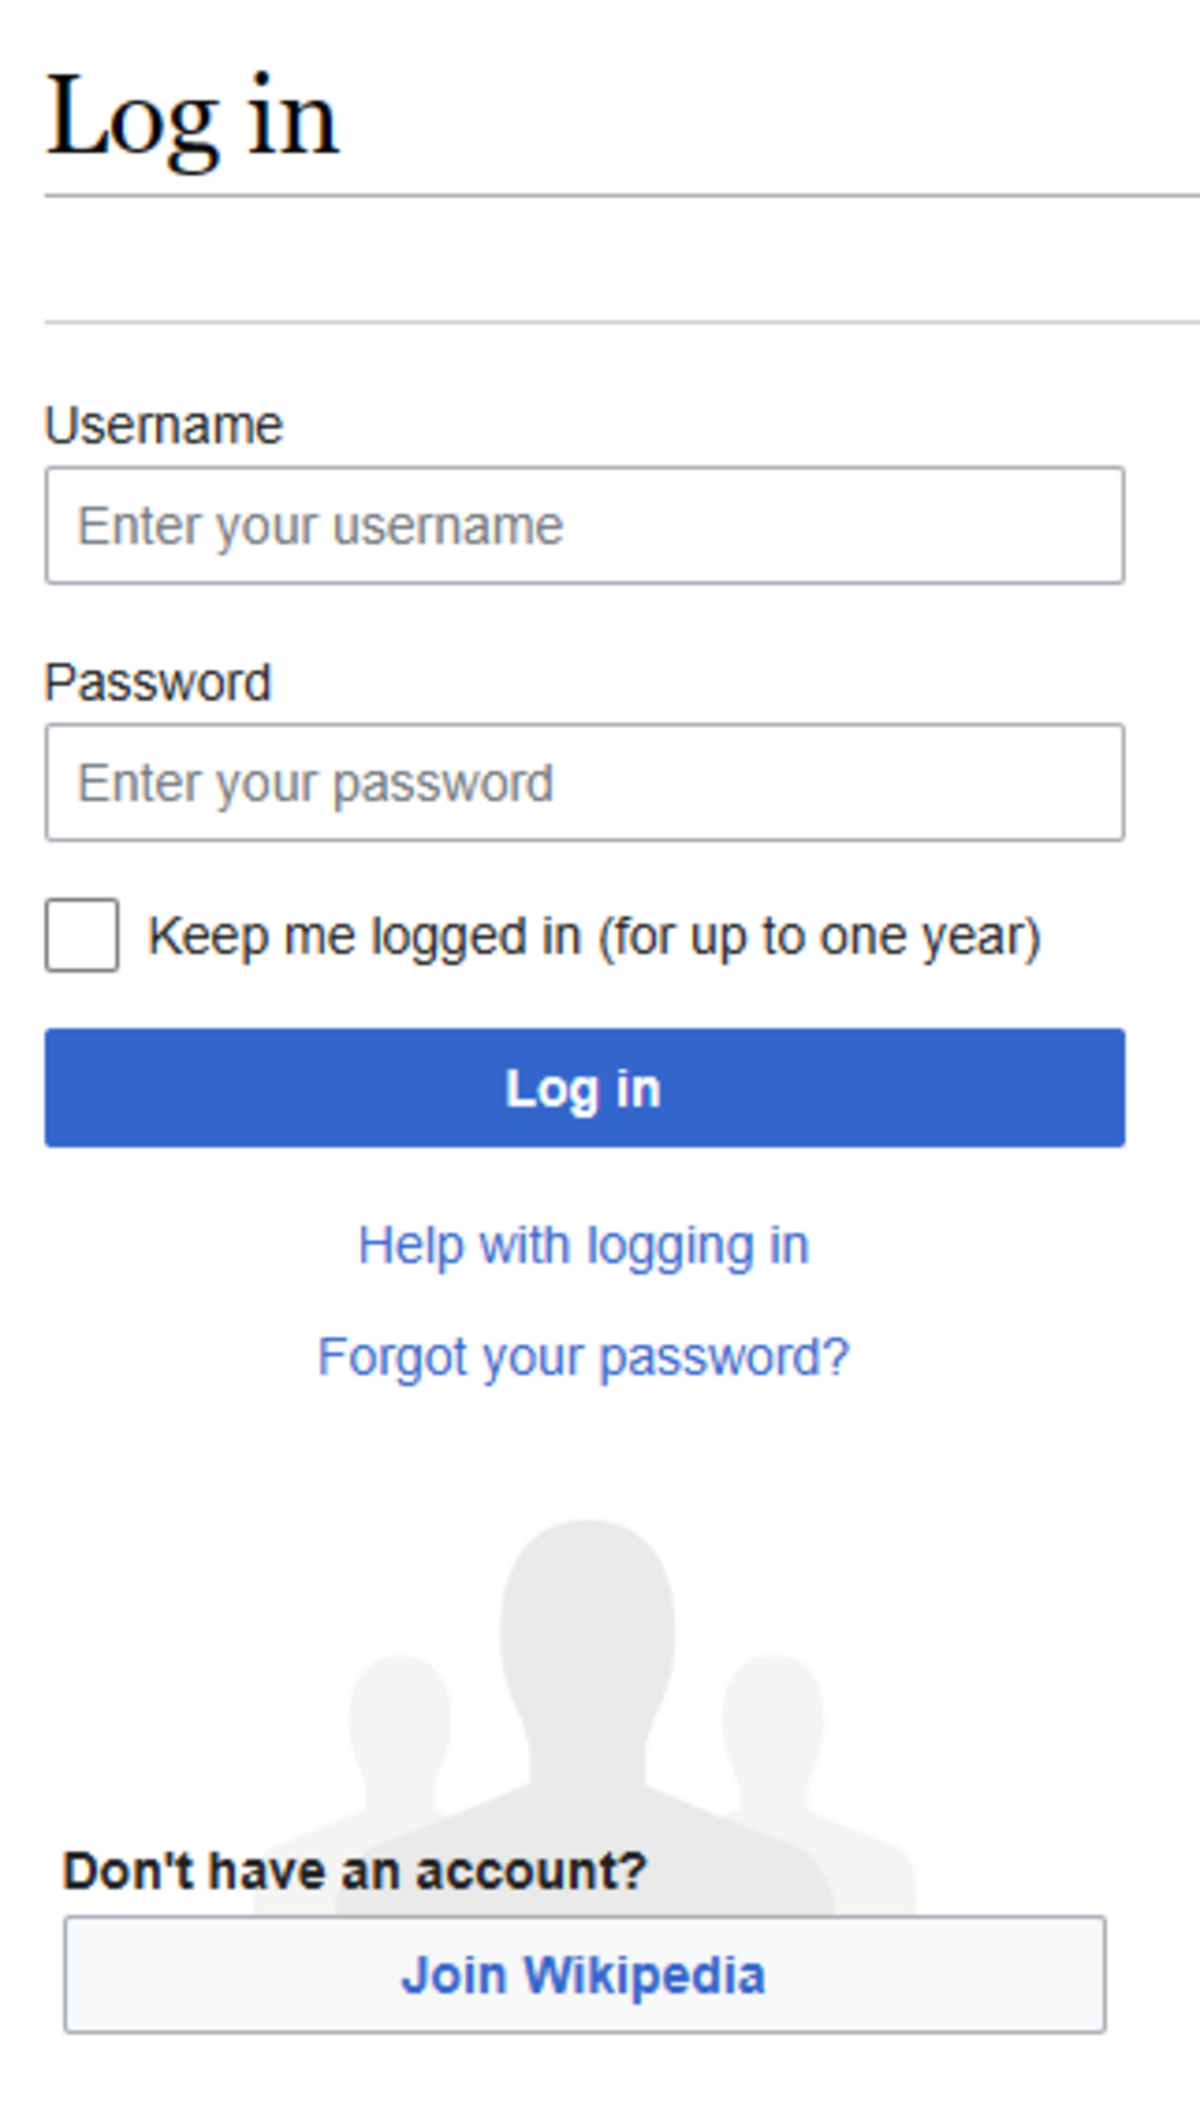 Step 3: Provide your personal information, such as name, email address, and date of birth
Step 4: Choose a unique username and password